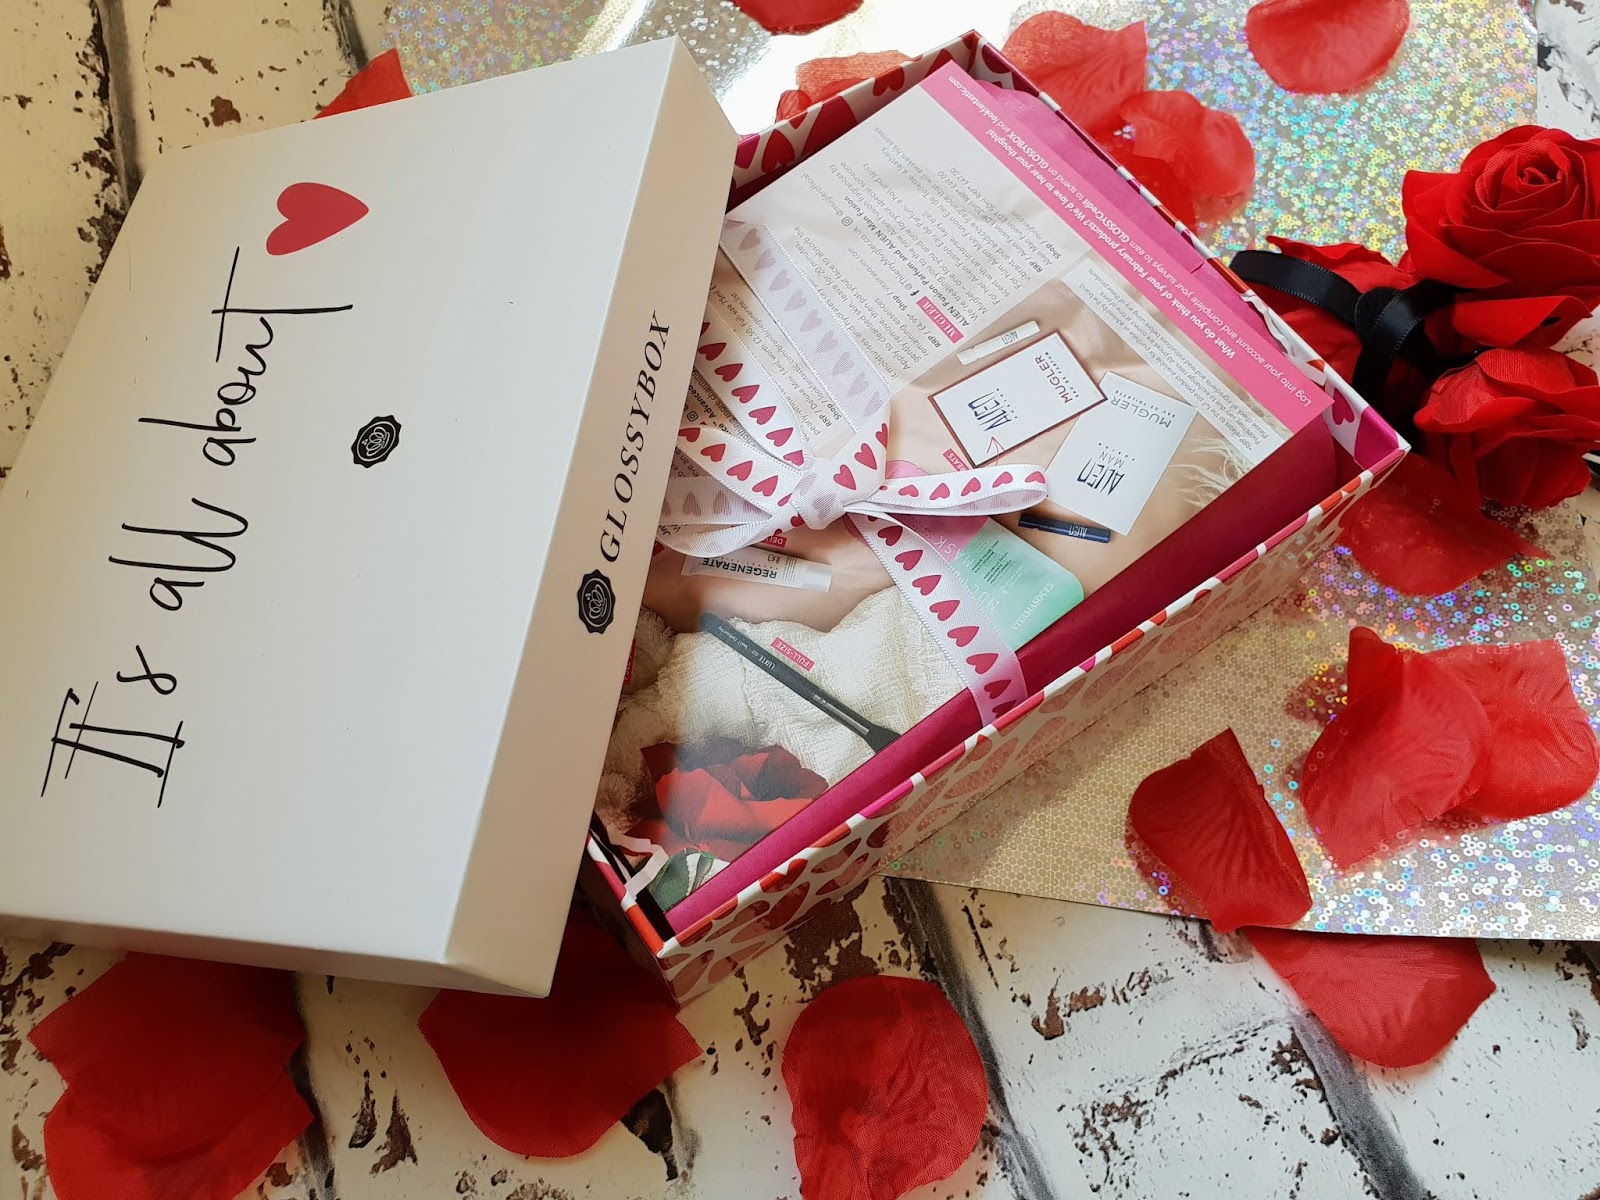 GLOSSYBOX FEBRUARY 2019 UNBOXING! | REVIEW